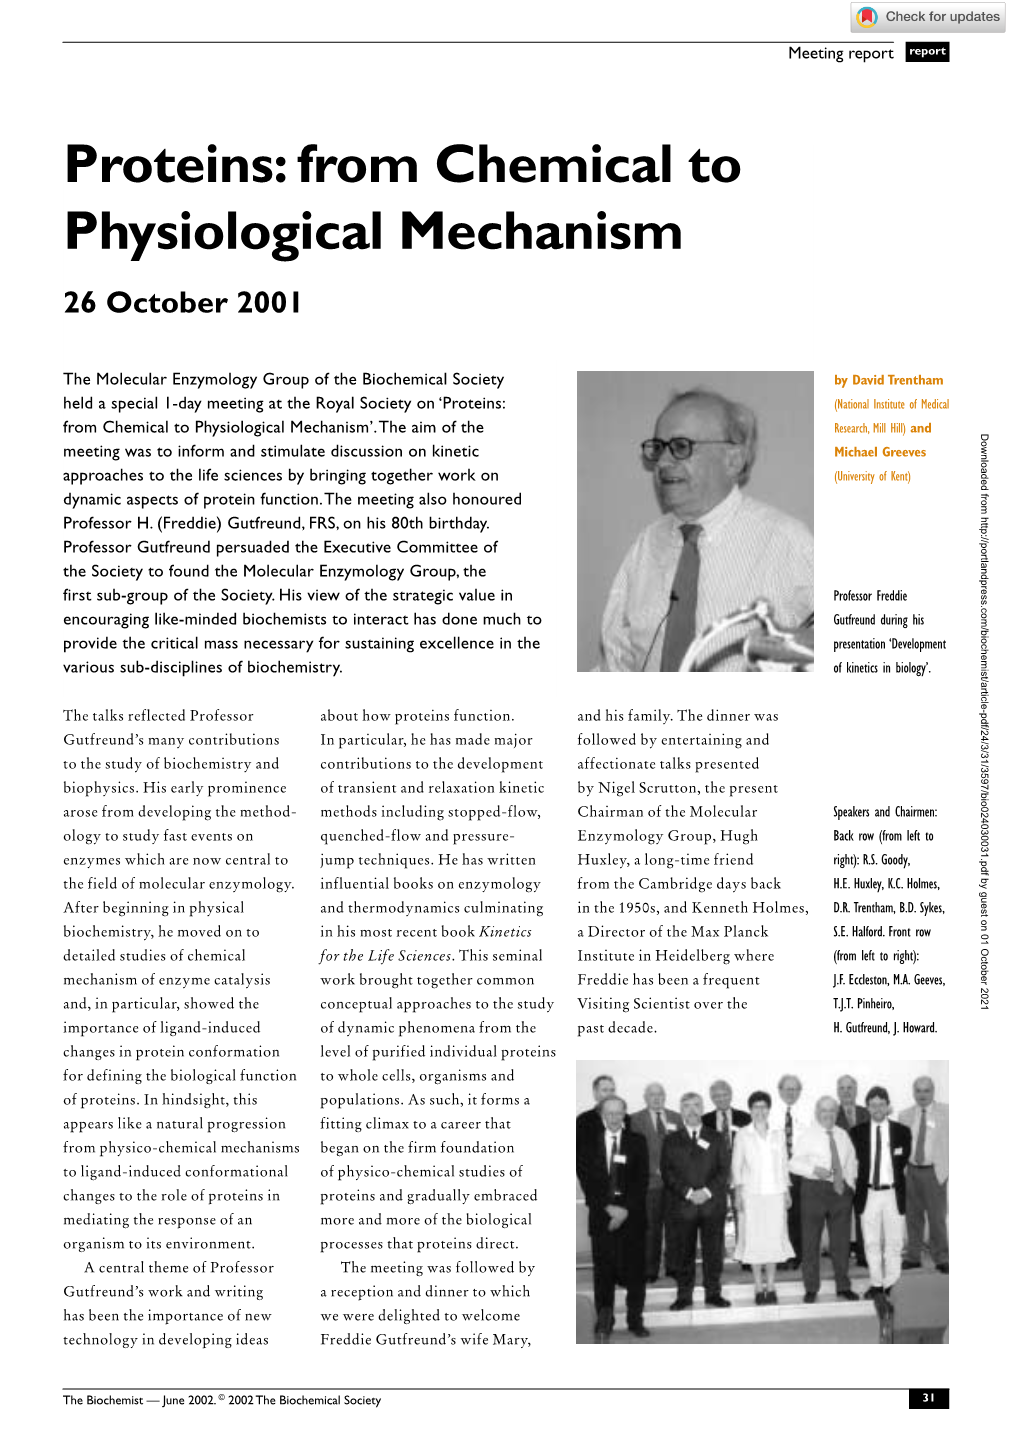 Proteins: from Chemical to Physiological Mechanism 26 October 2001